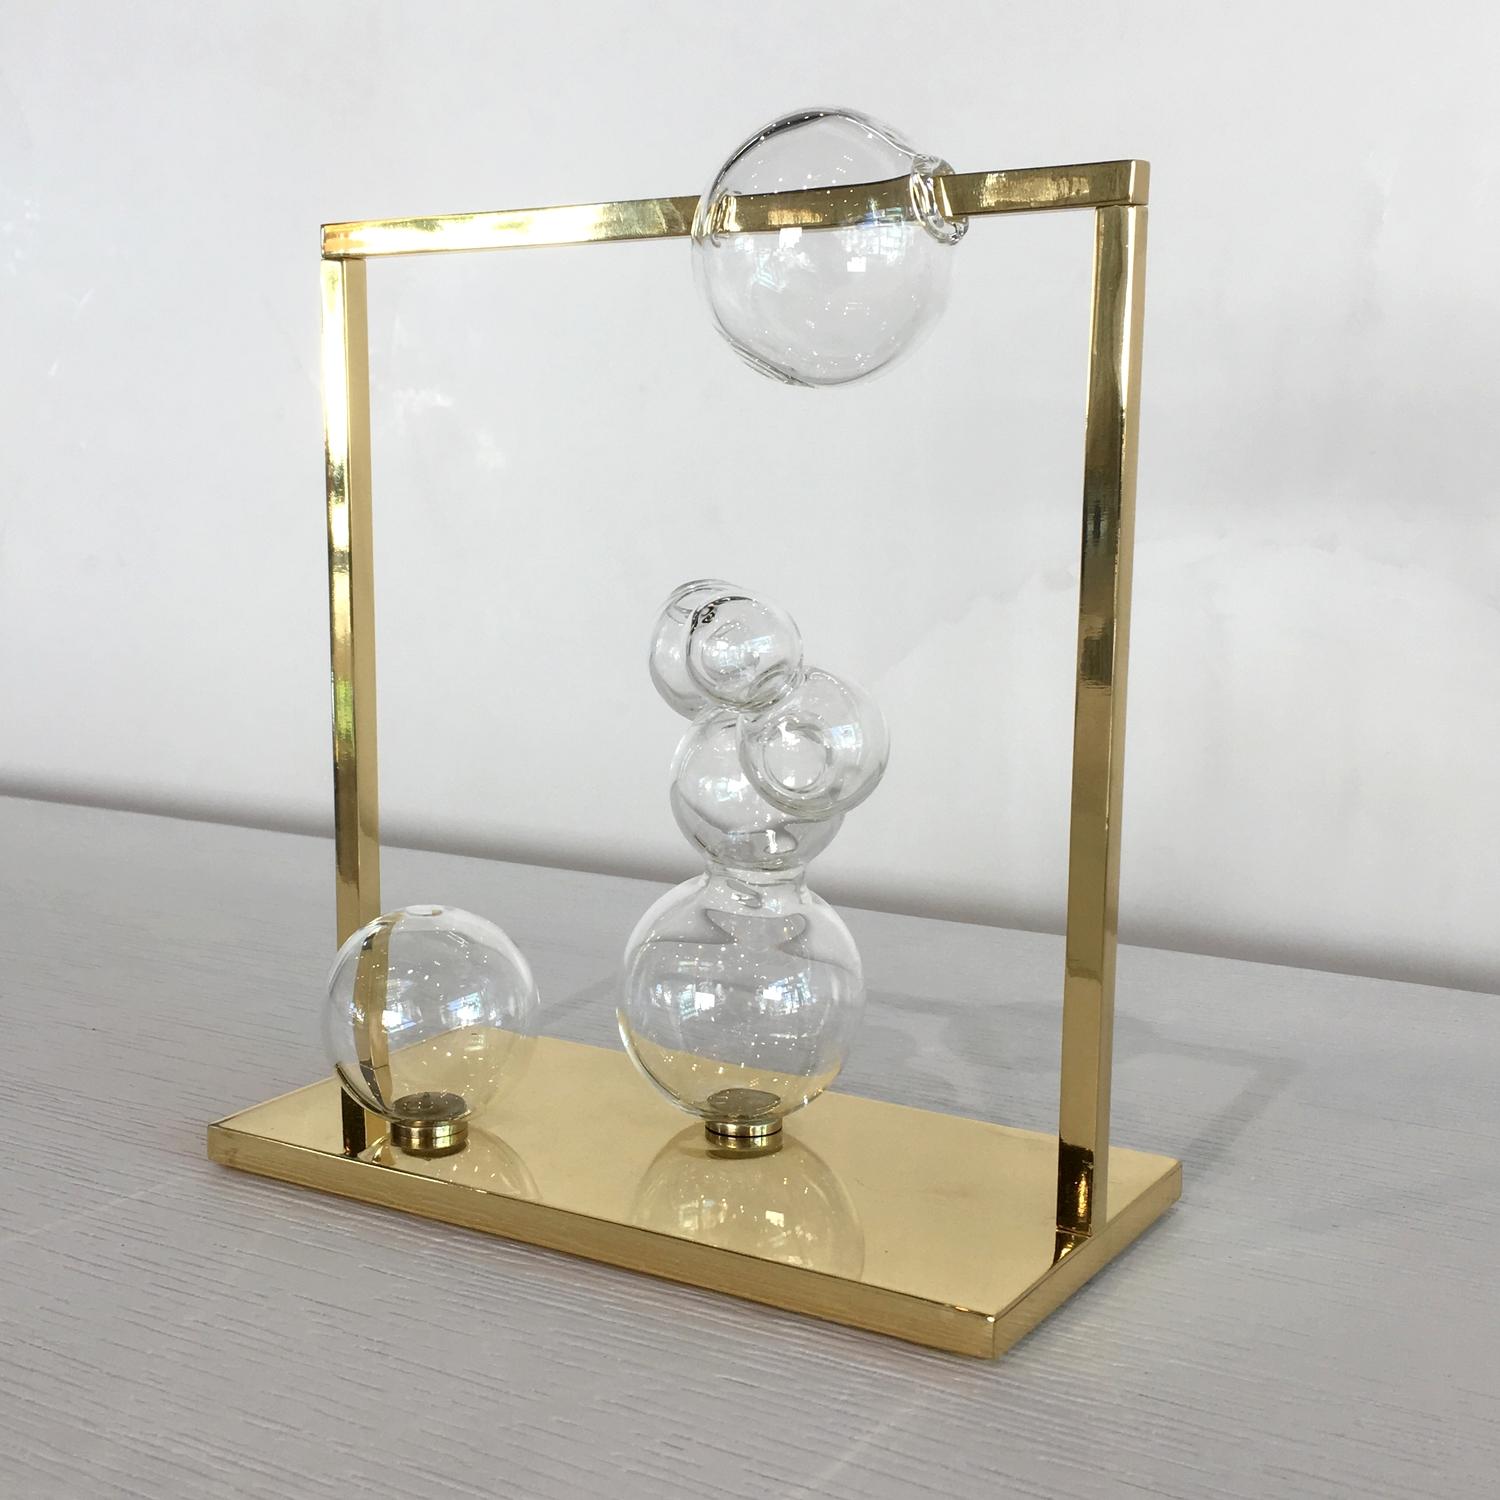 Atelier Crestani, small bubble vase glass sculpture, made in Italy.